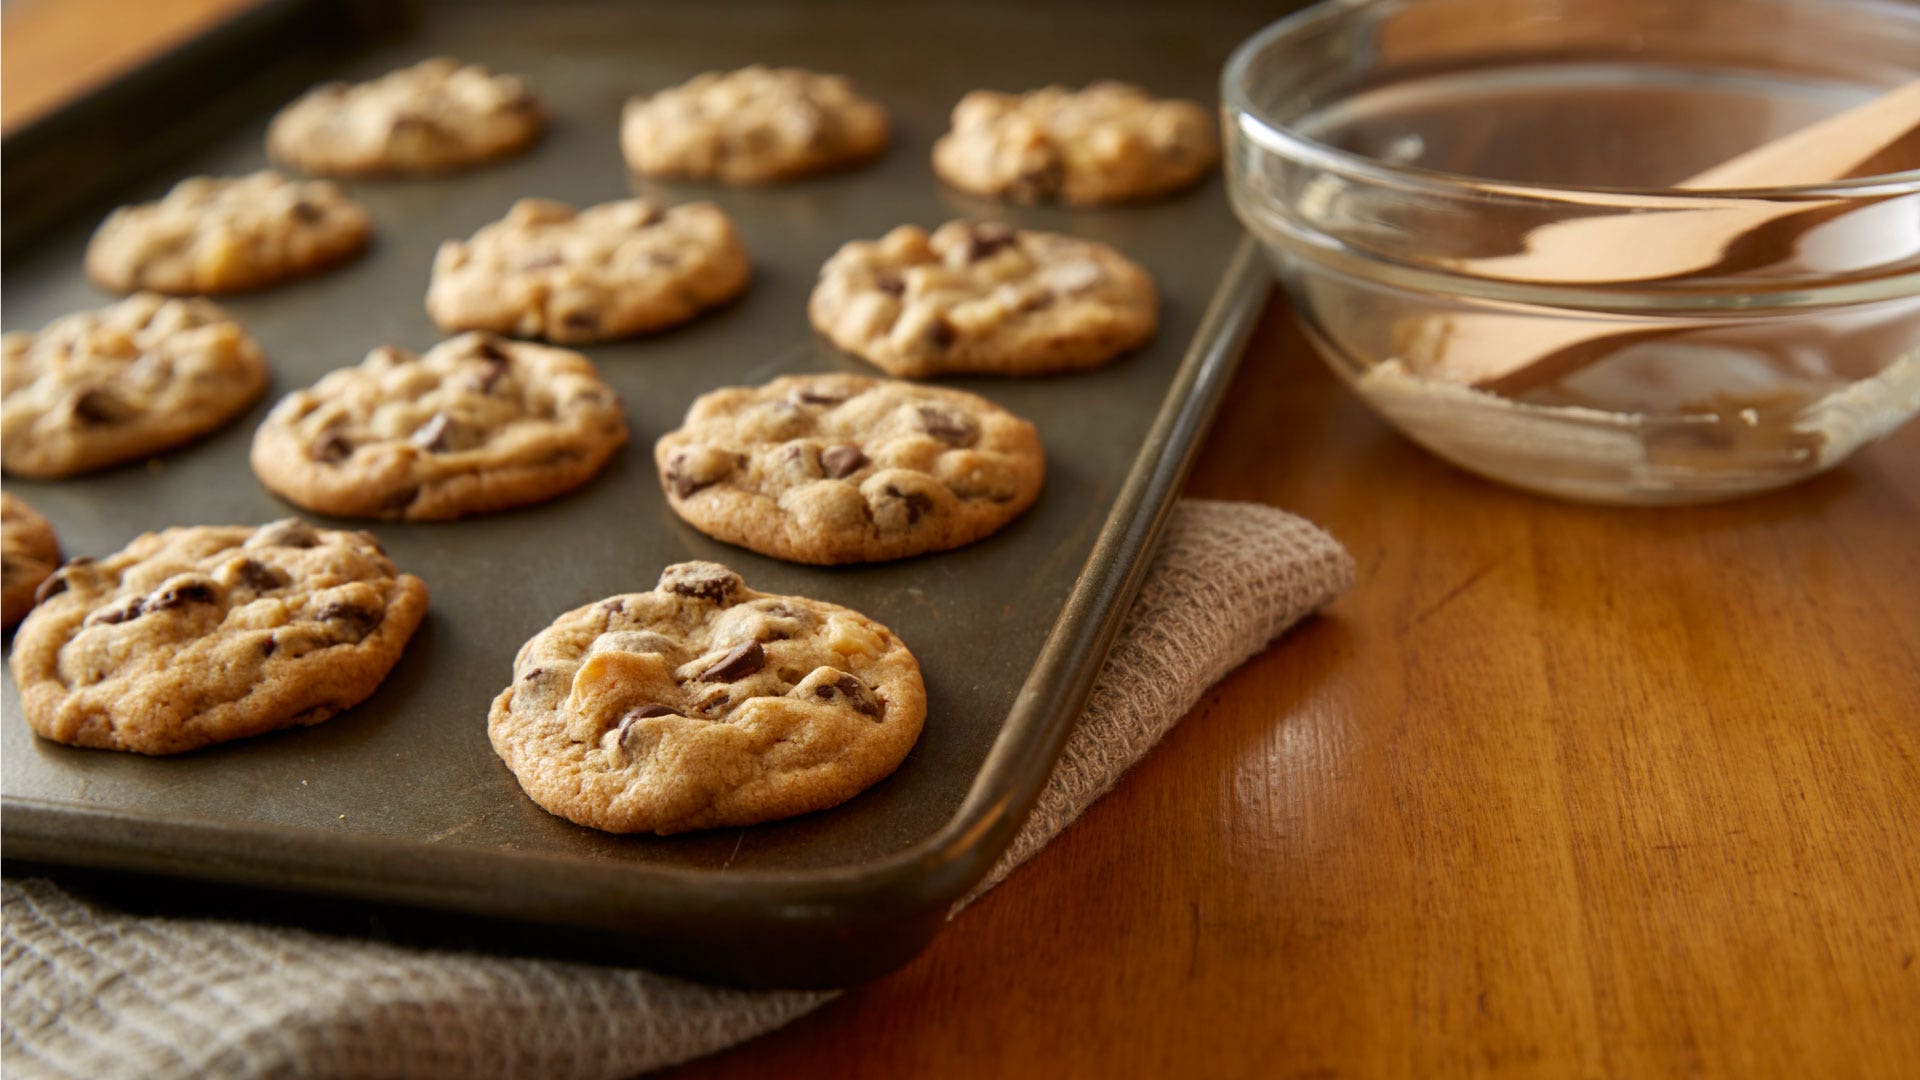 Image of HERSHEY'S SPECIAL DARK Chips and Macadamia Pieces Cookies